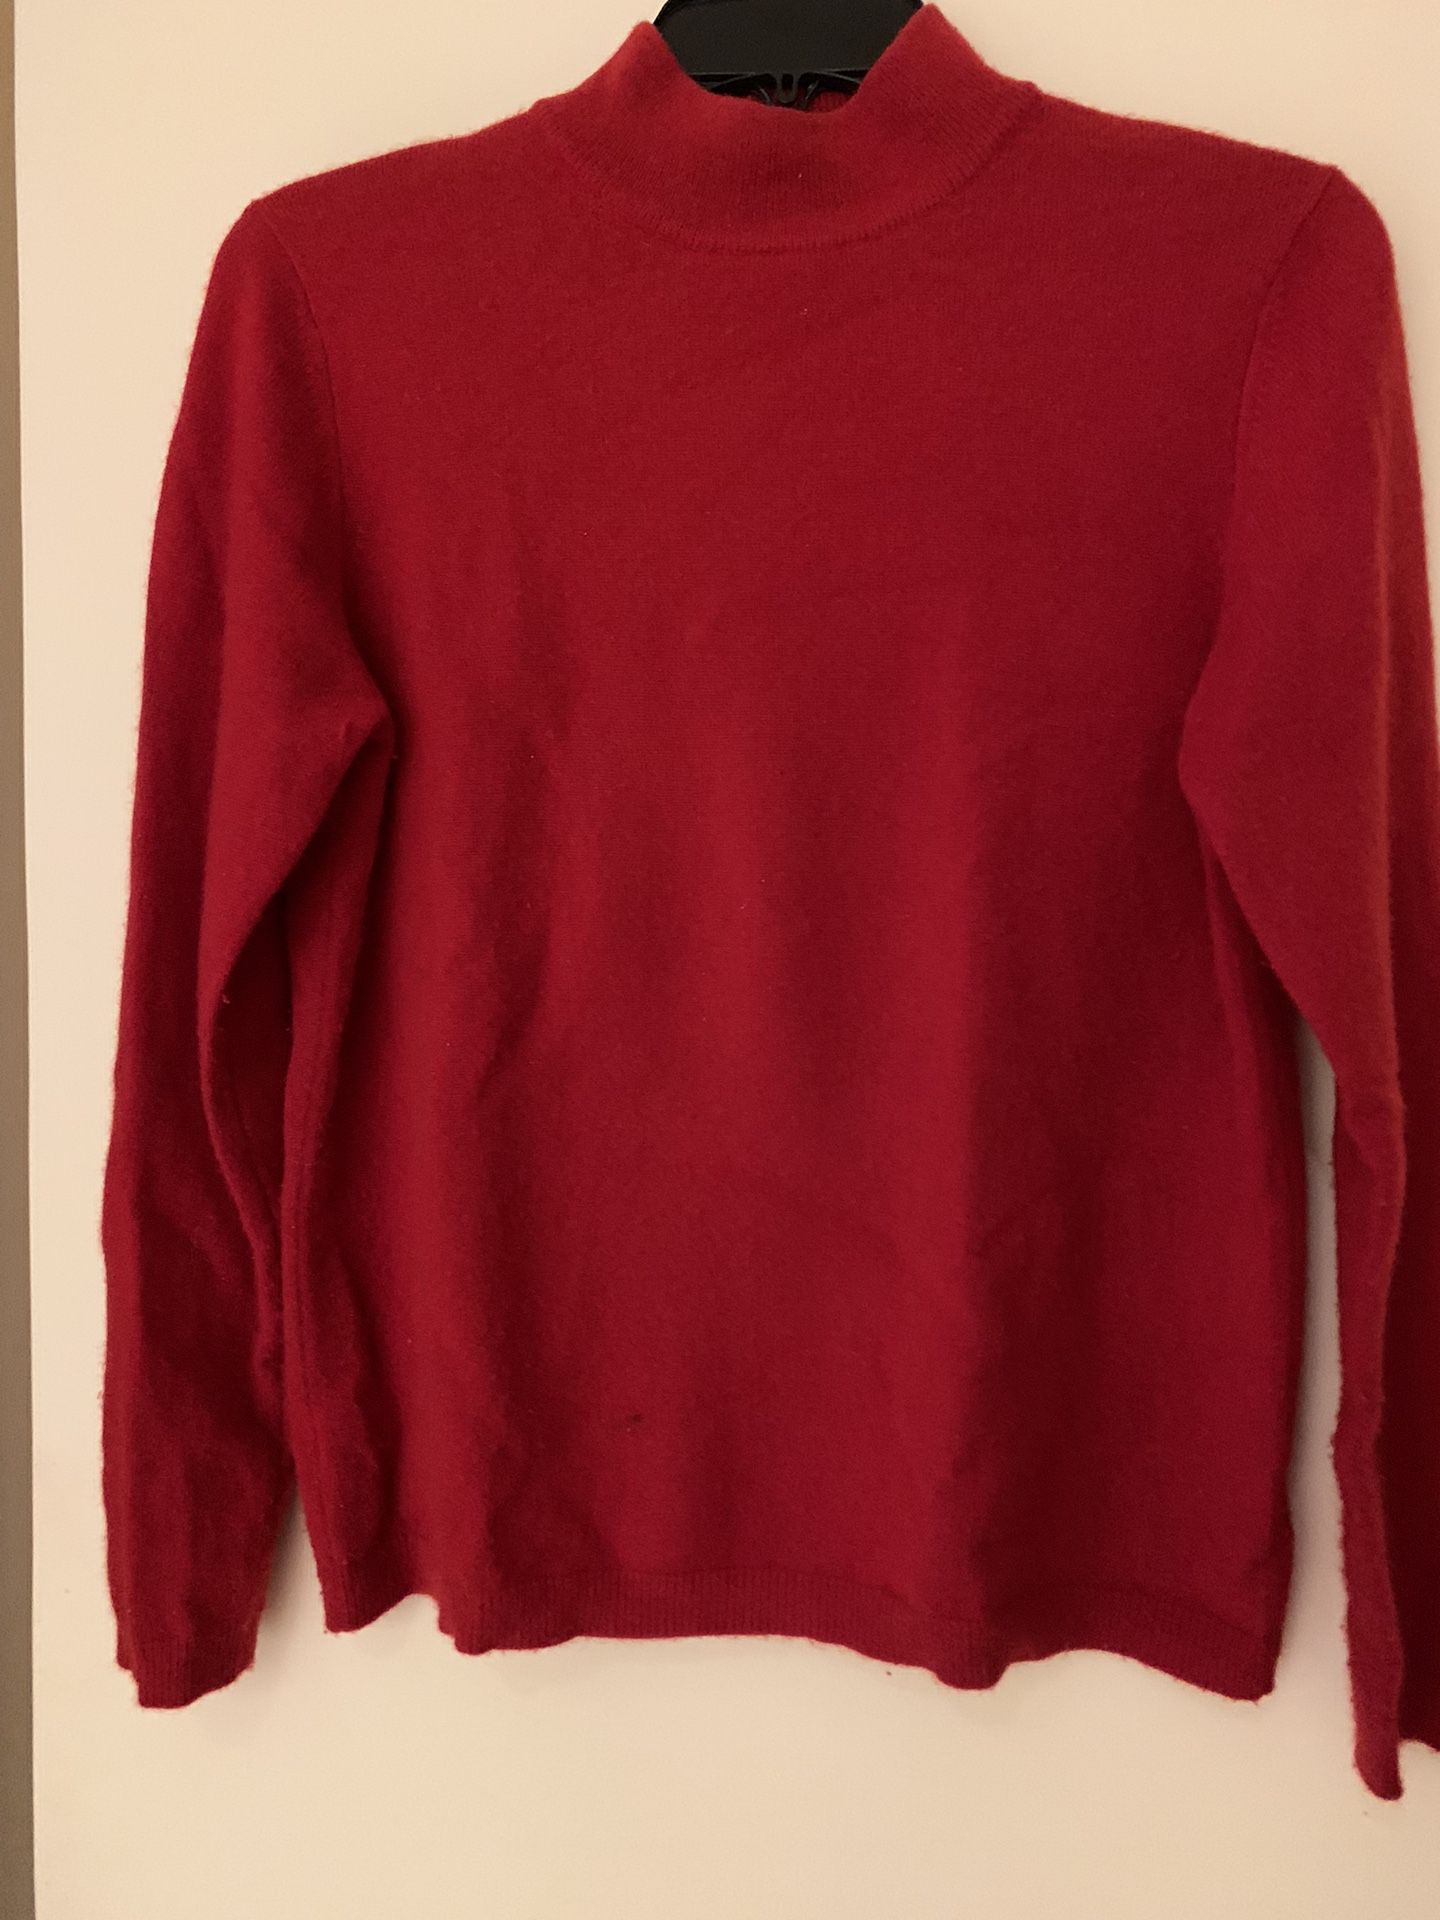 Charter Club 100% 2-Ply Red Cashmere Sweater Size P/S